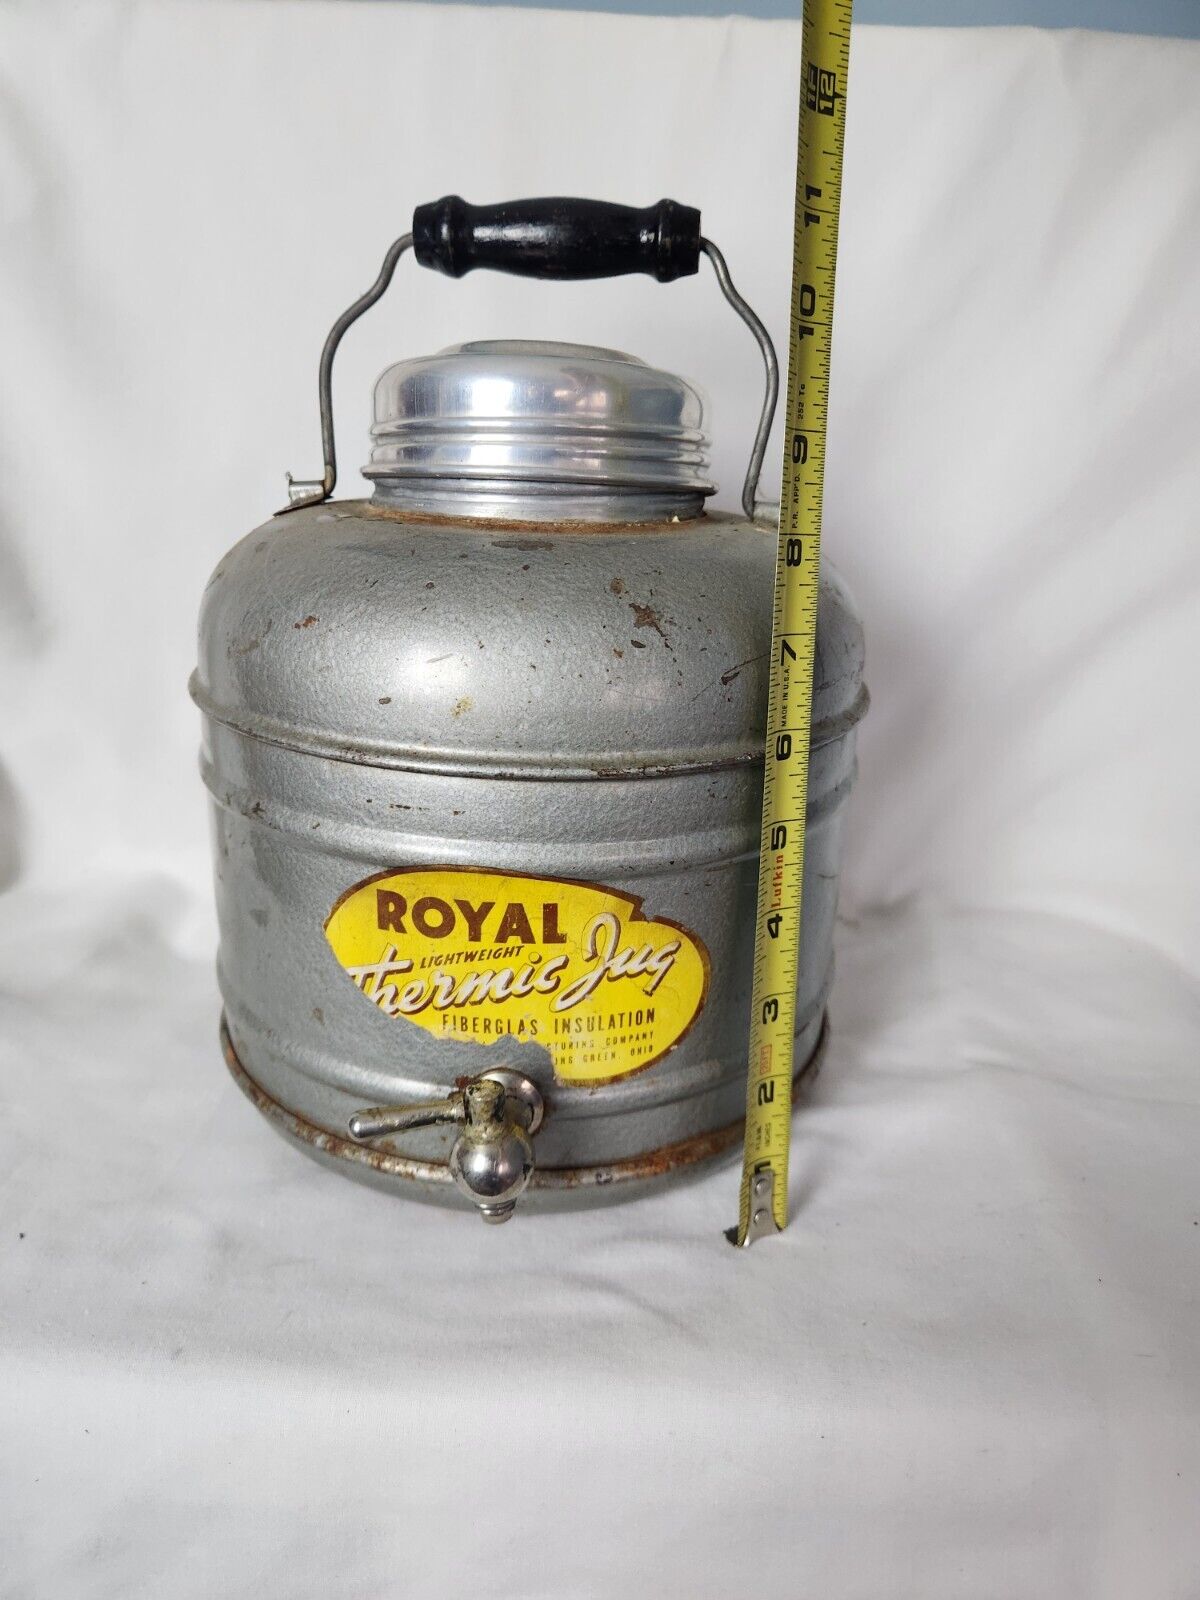 ANTIQUE ROYAL LIGHTWEIGHT THERMIC JUG METAL - VERY COOL - BUP